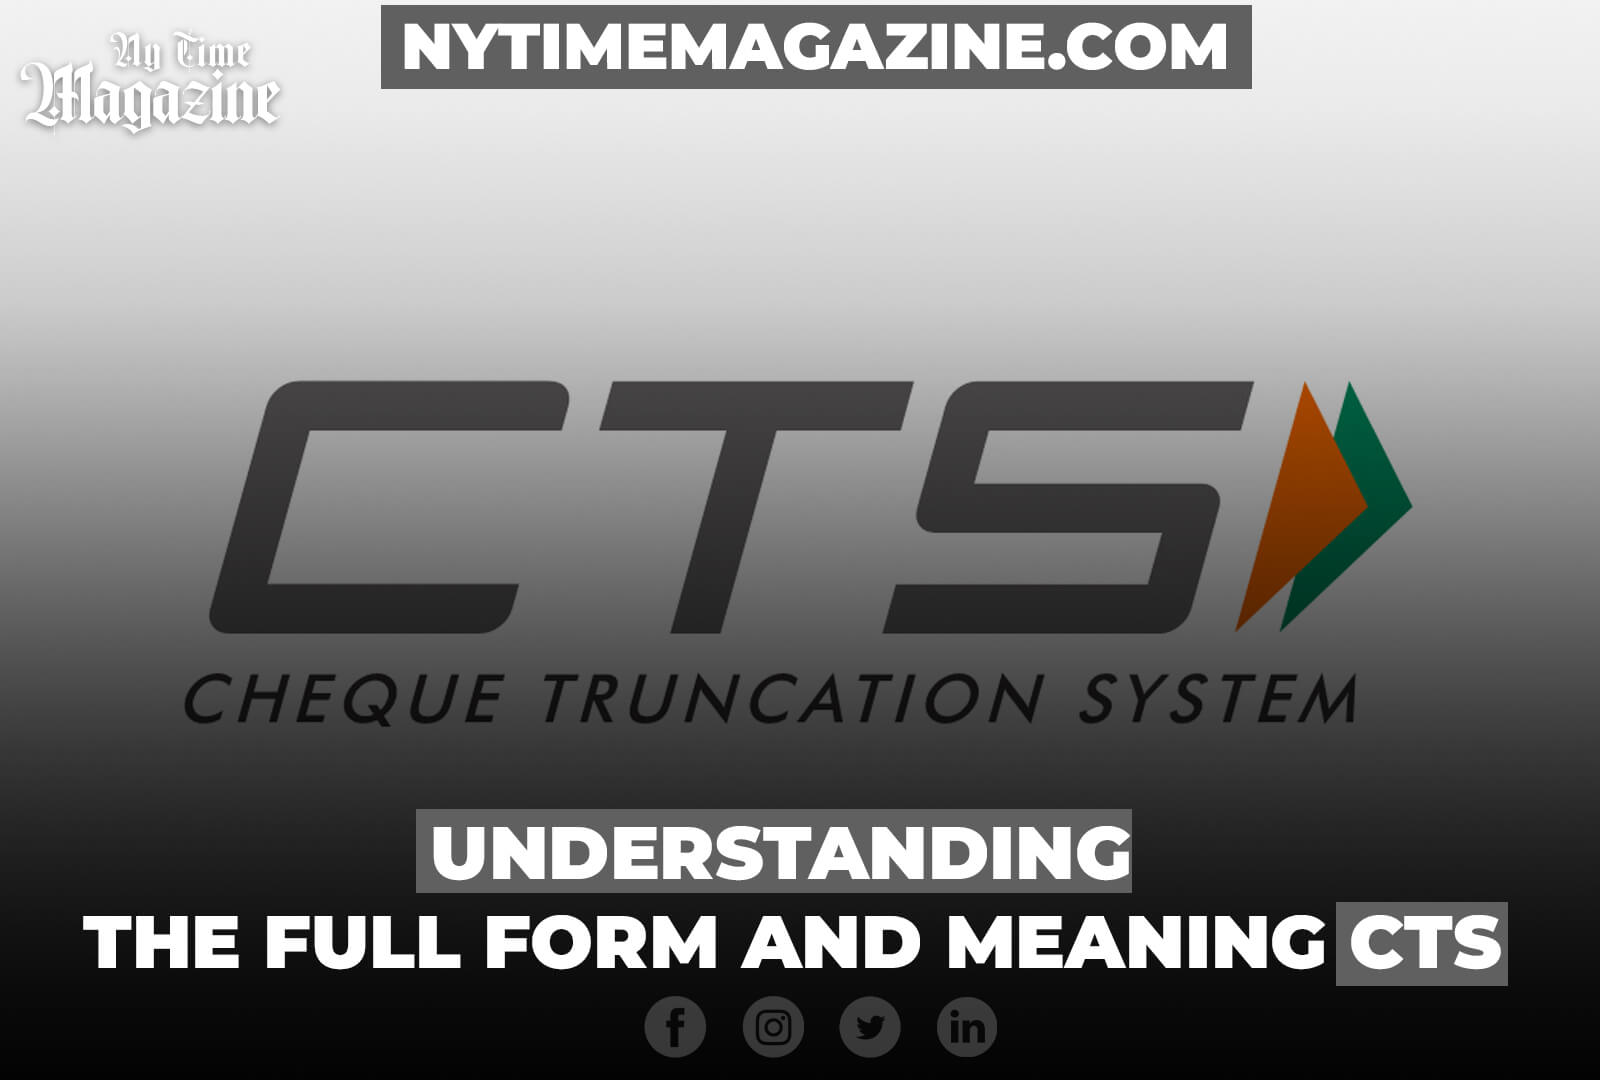 UNDERSTANDING THE FULL FORM AND MEANING CTS